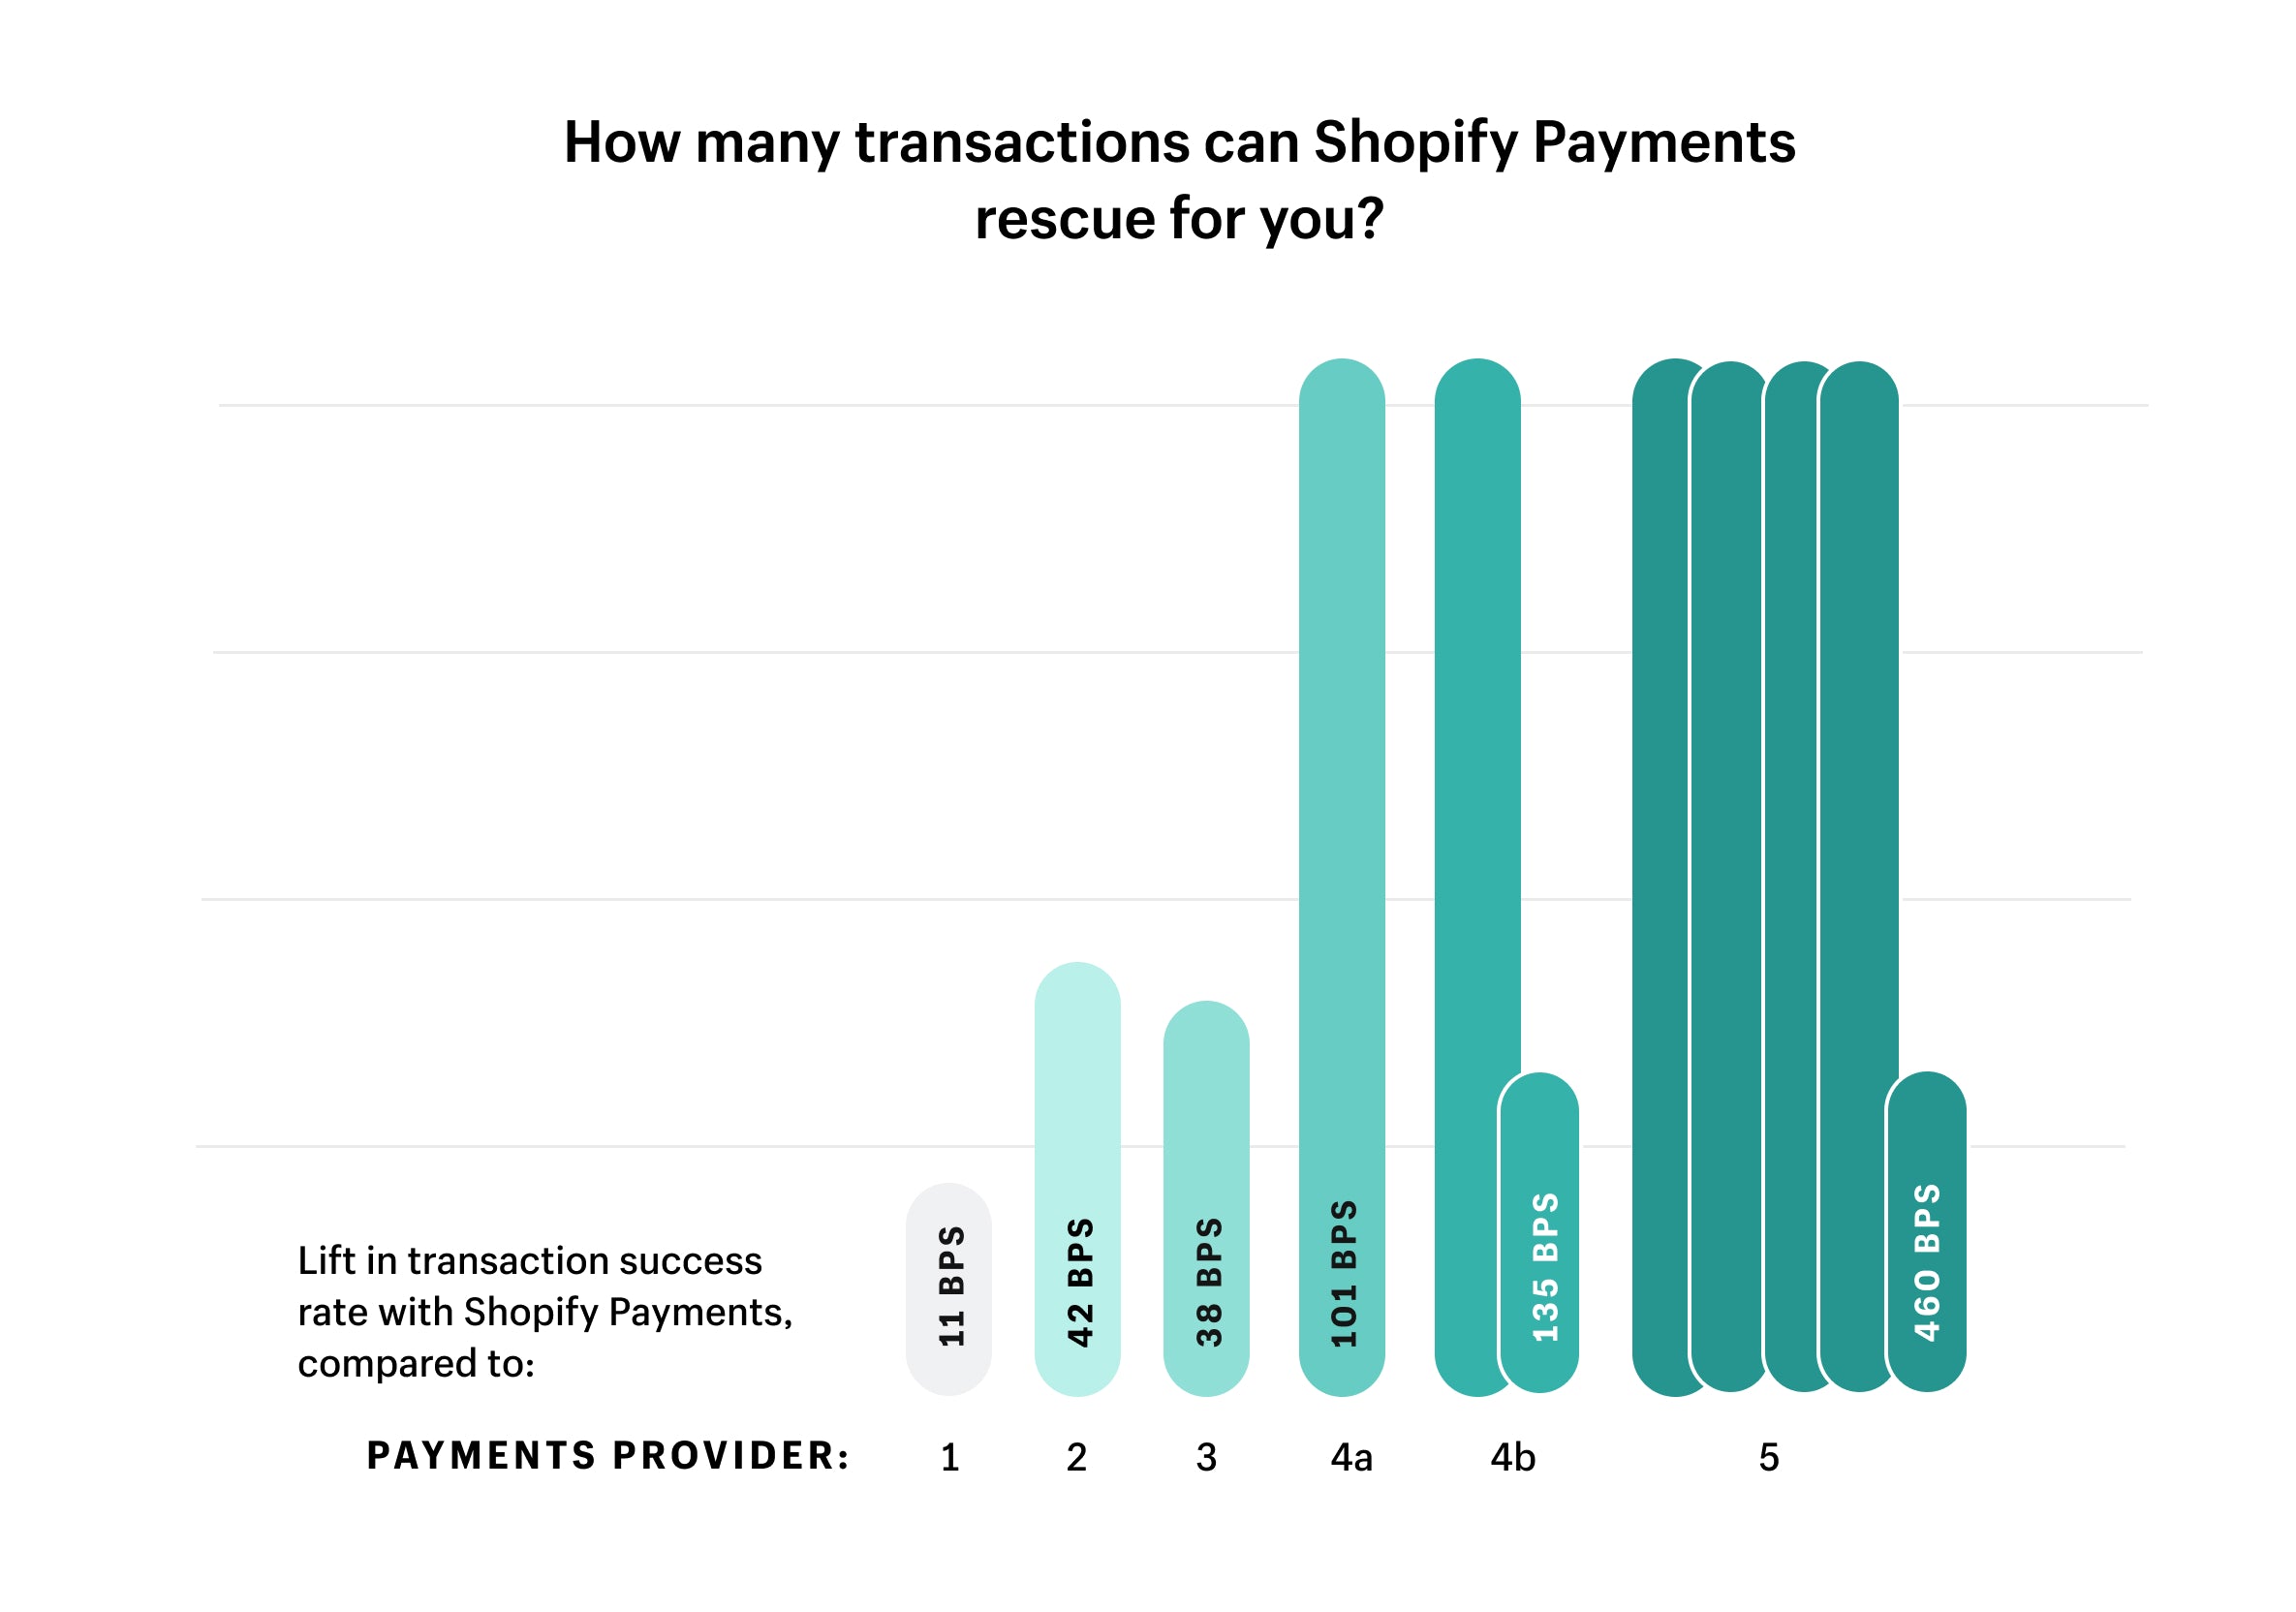 Save more transactions with Shopify Payments.